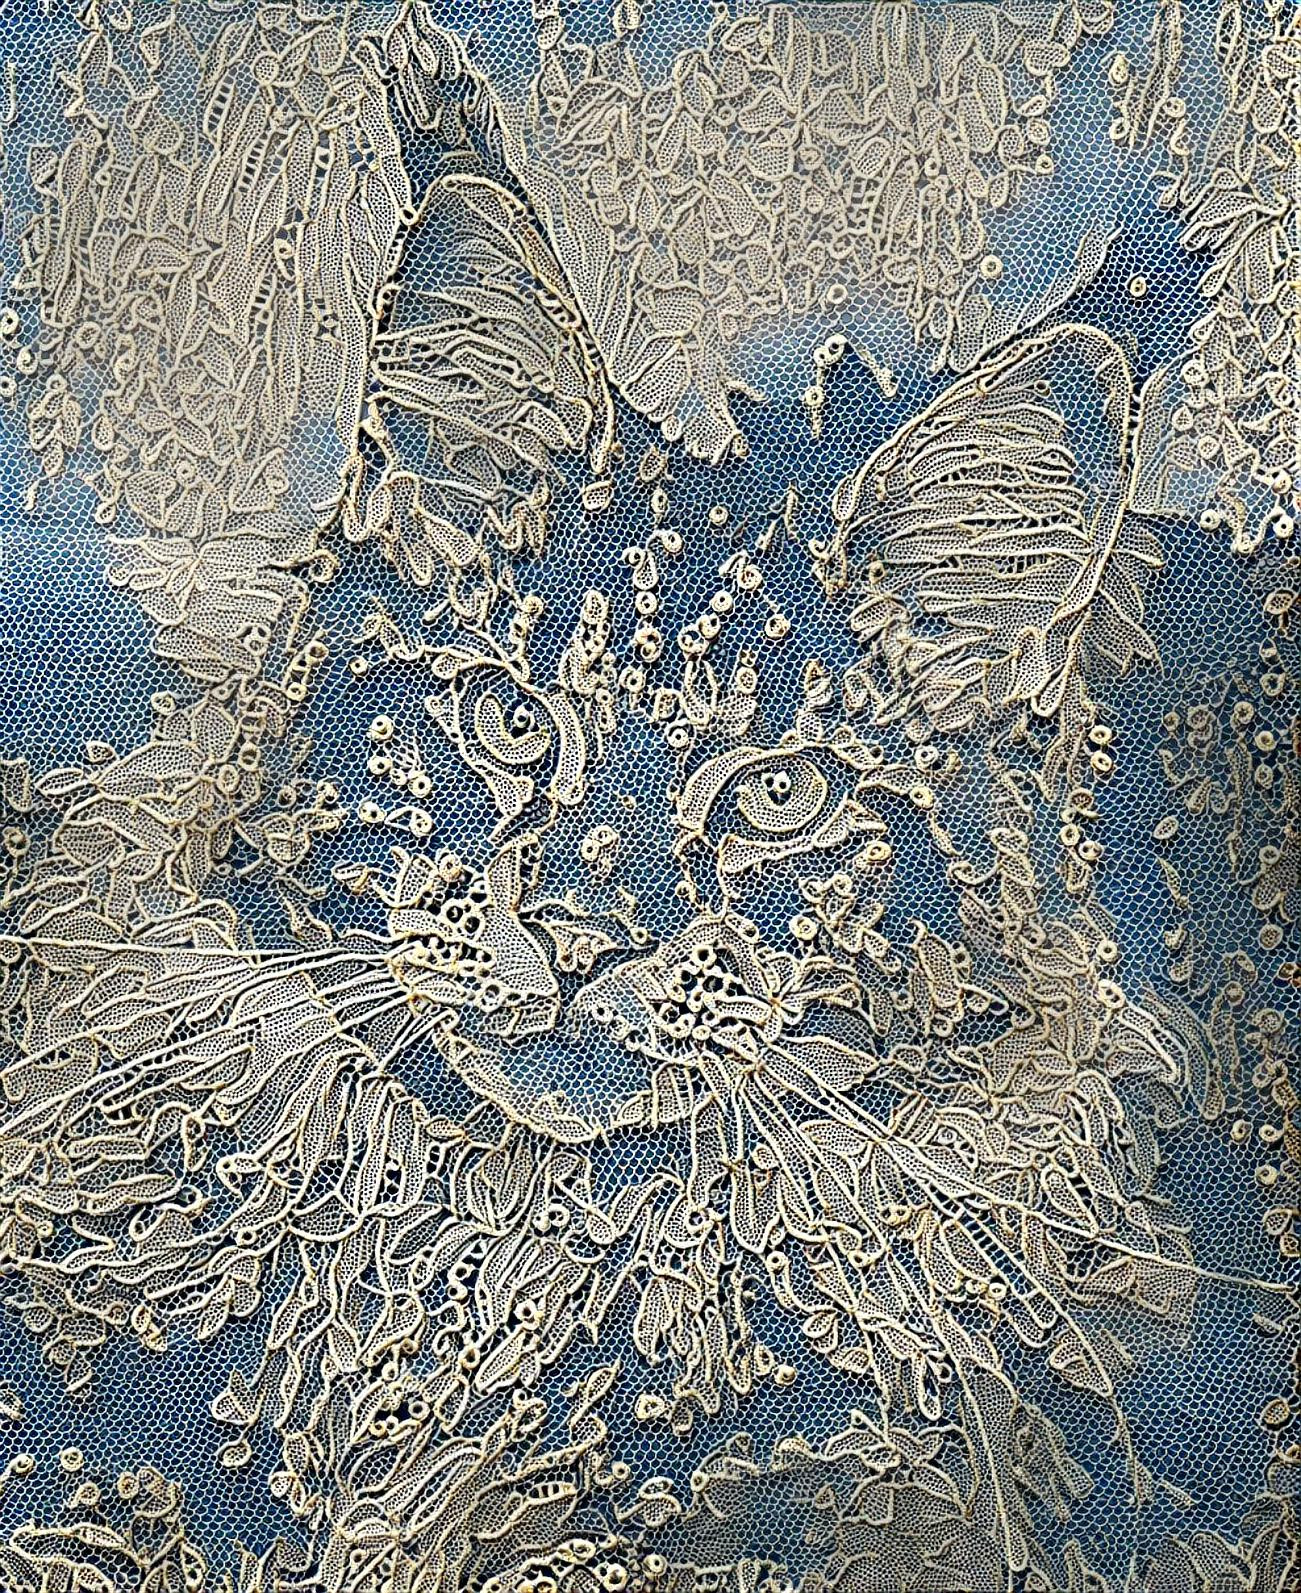 Maine Coon Cat Captured in Lace